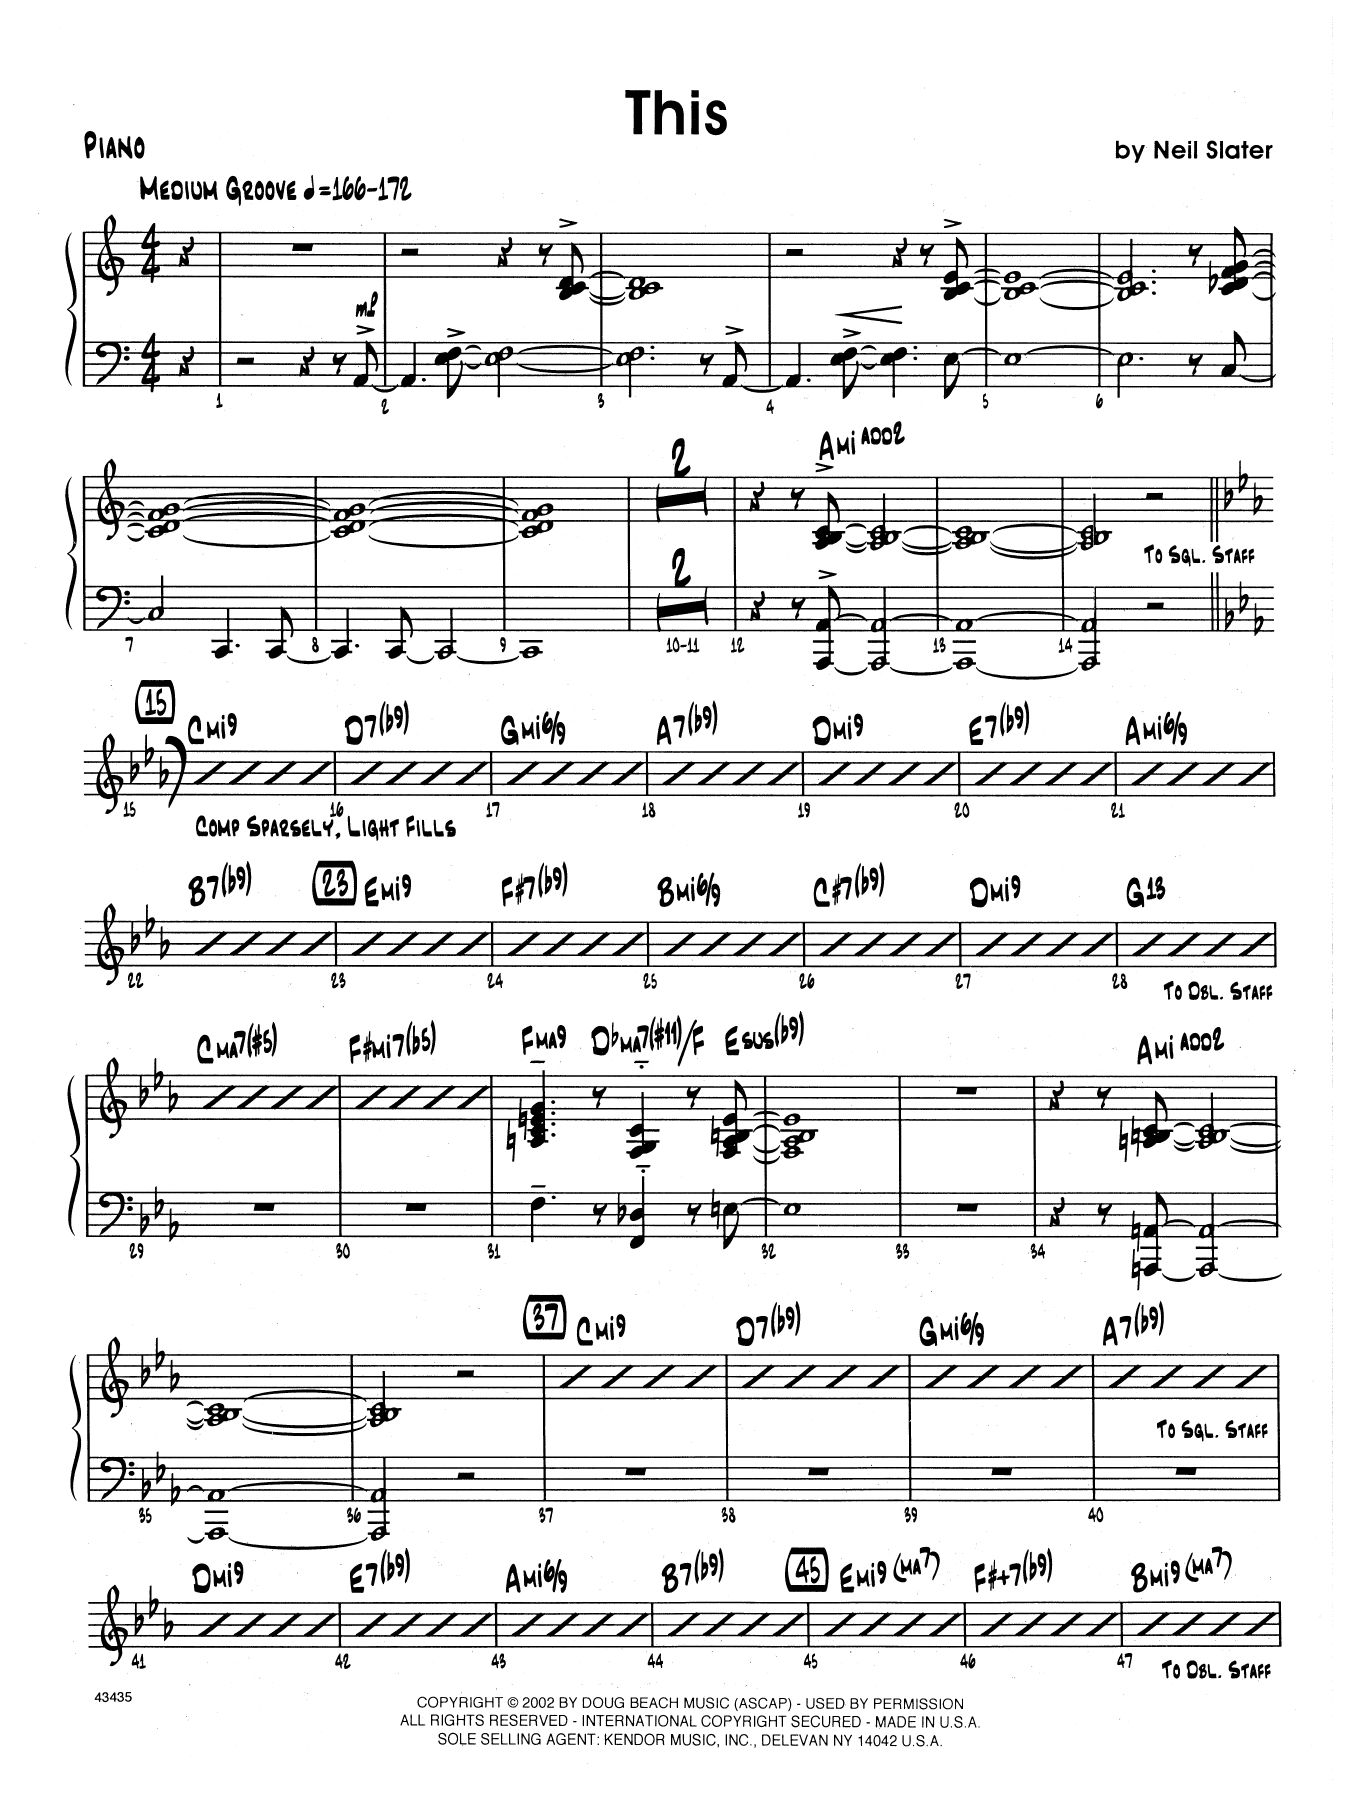 Download Neil Slater This - Piano Sheet Music